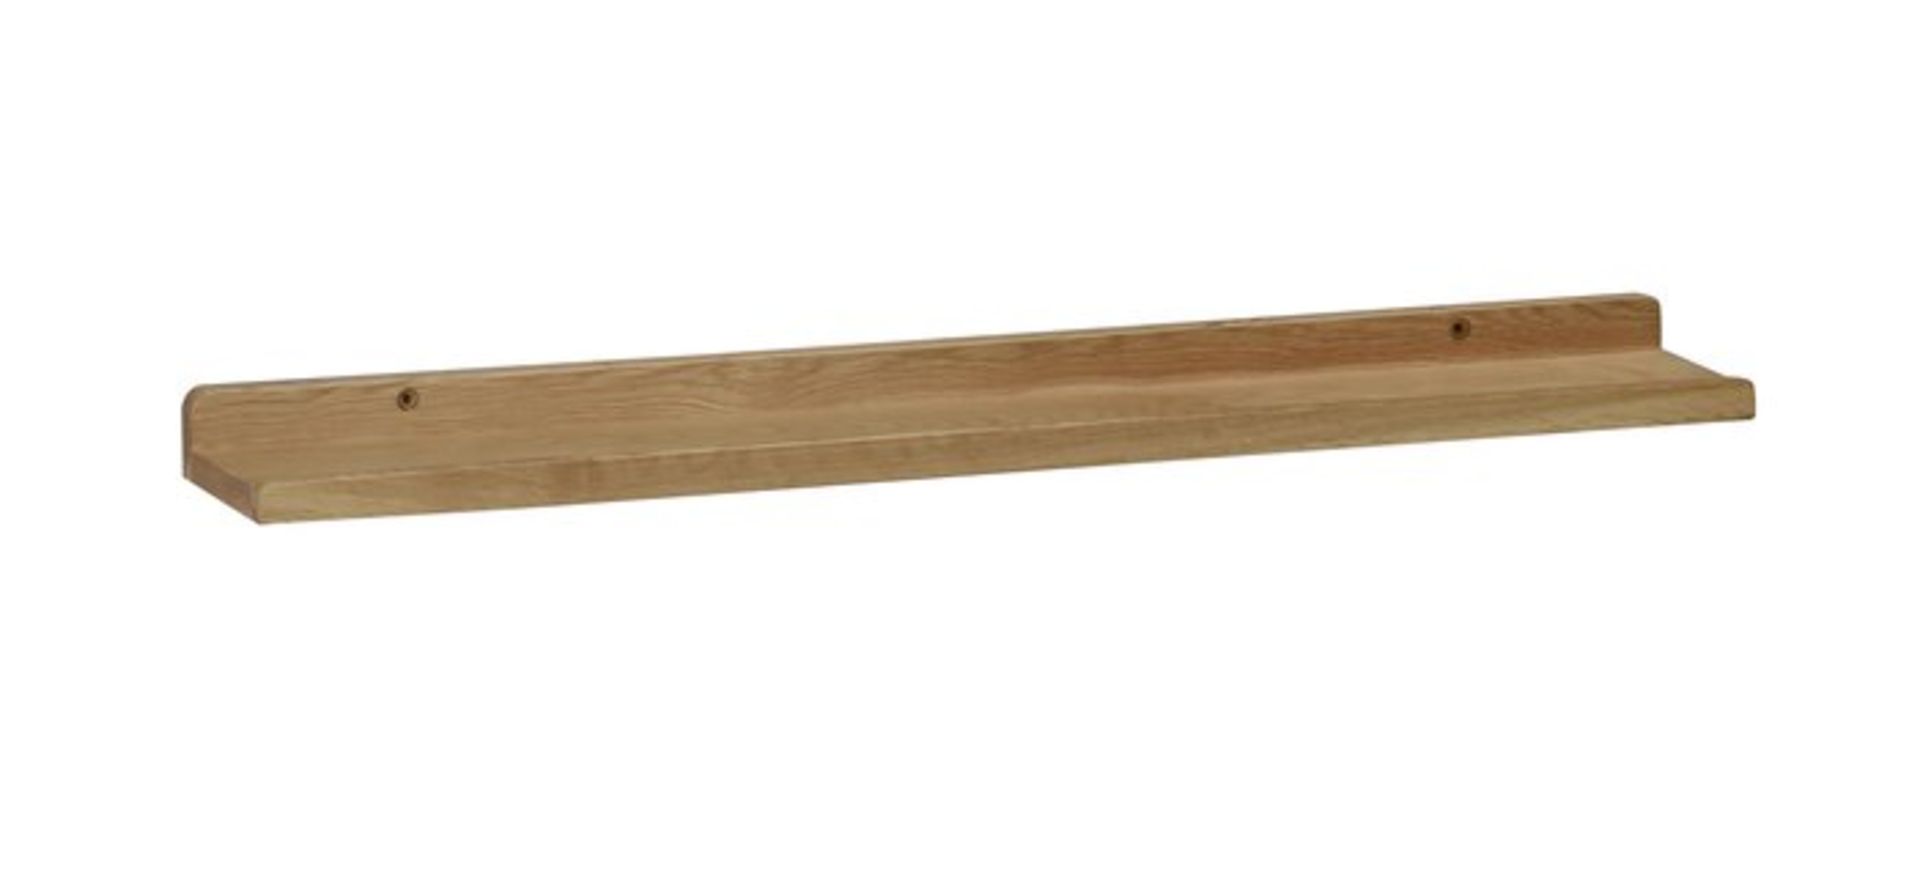 Shotwell Picture Rail Wall Shelf - RRP £23.99 - Image 2 of 2